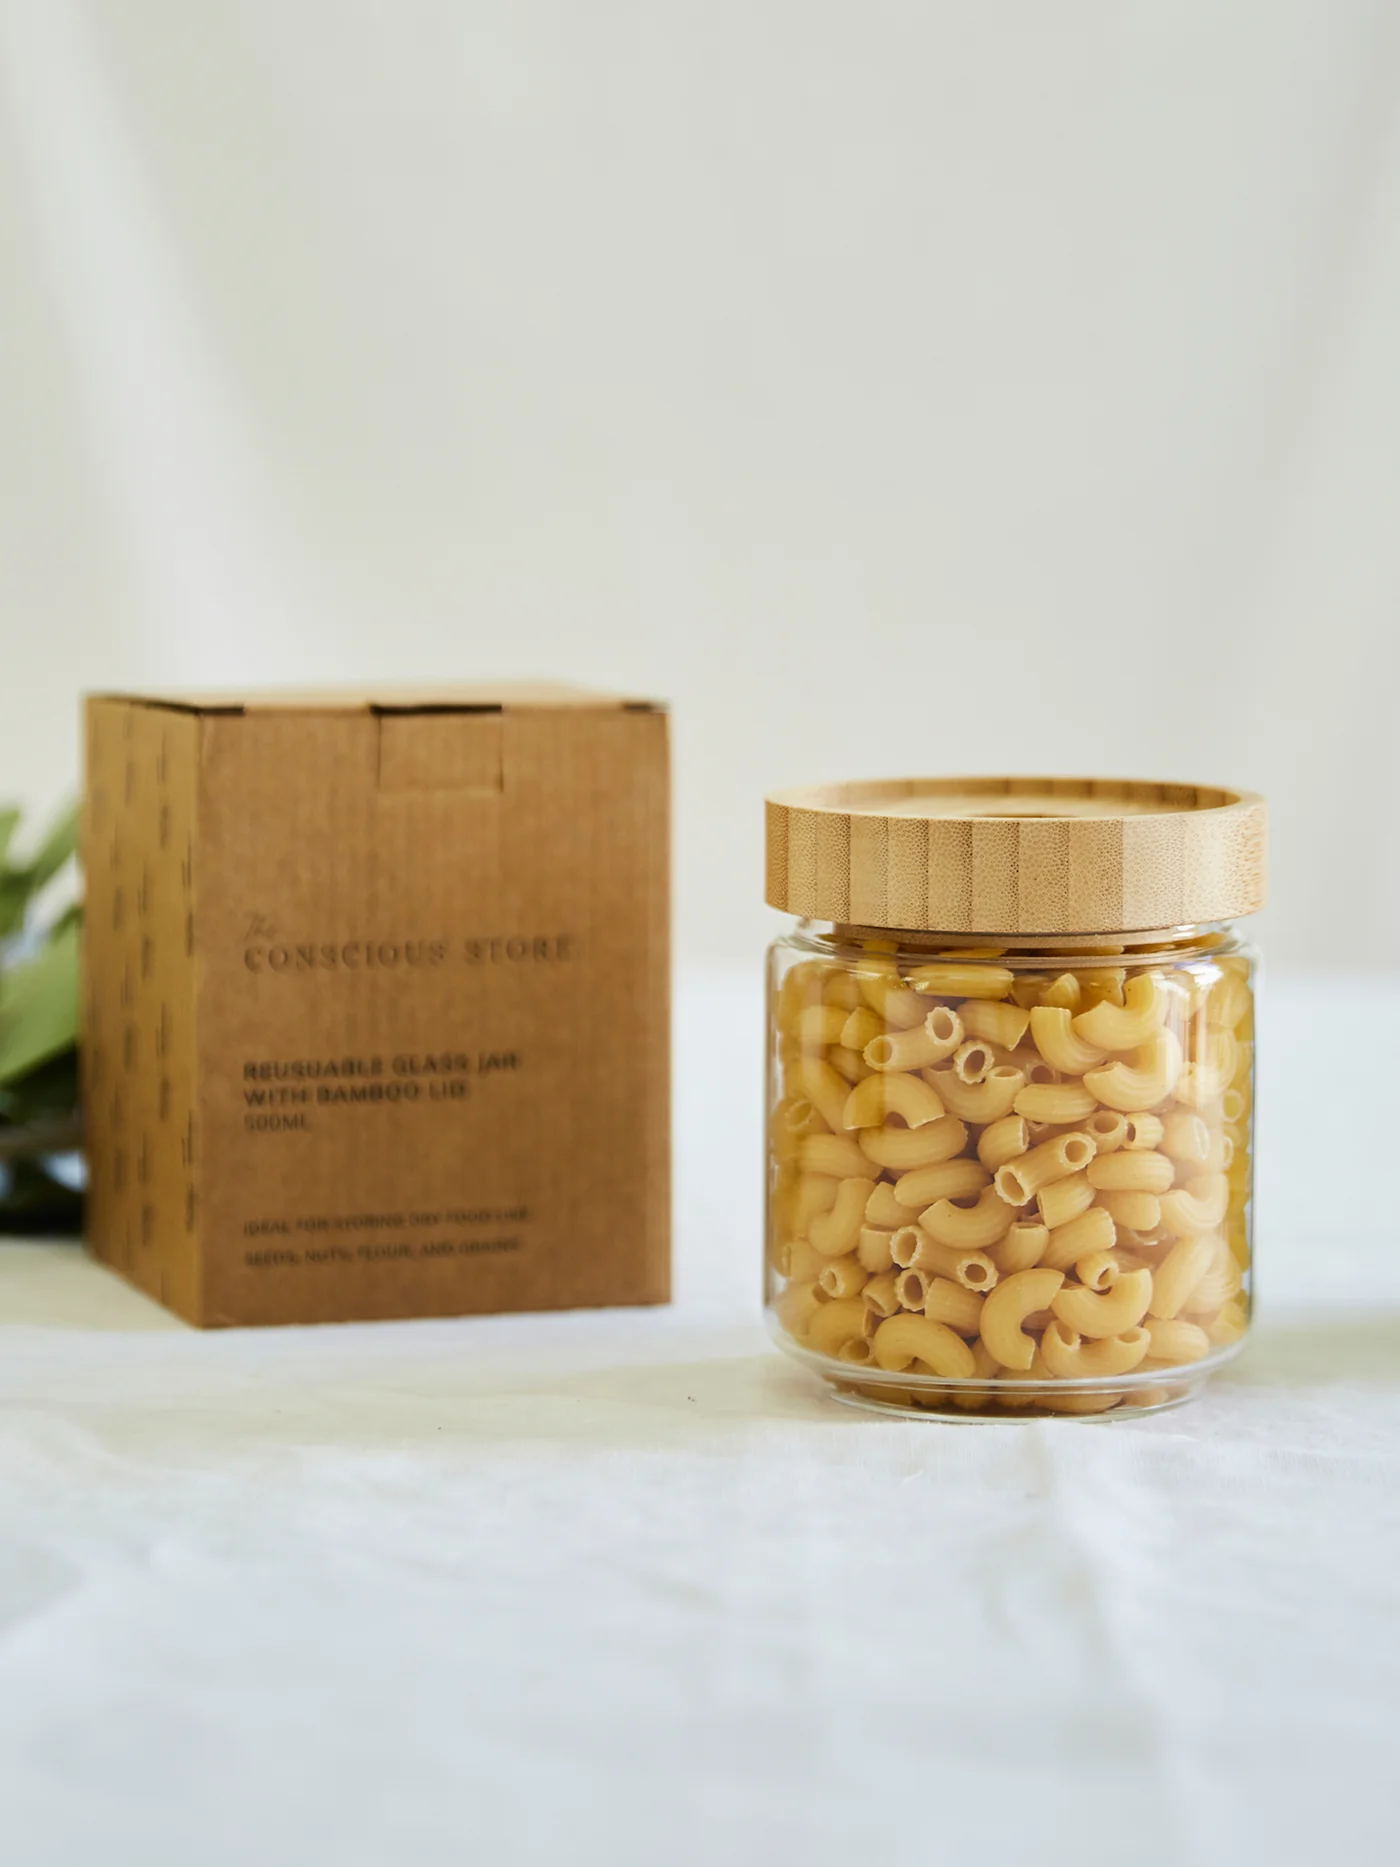 The Conscious Store - Glass Jars with Bamboo Lid